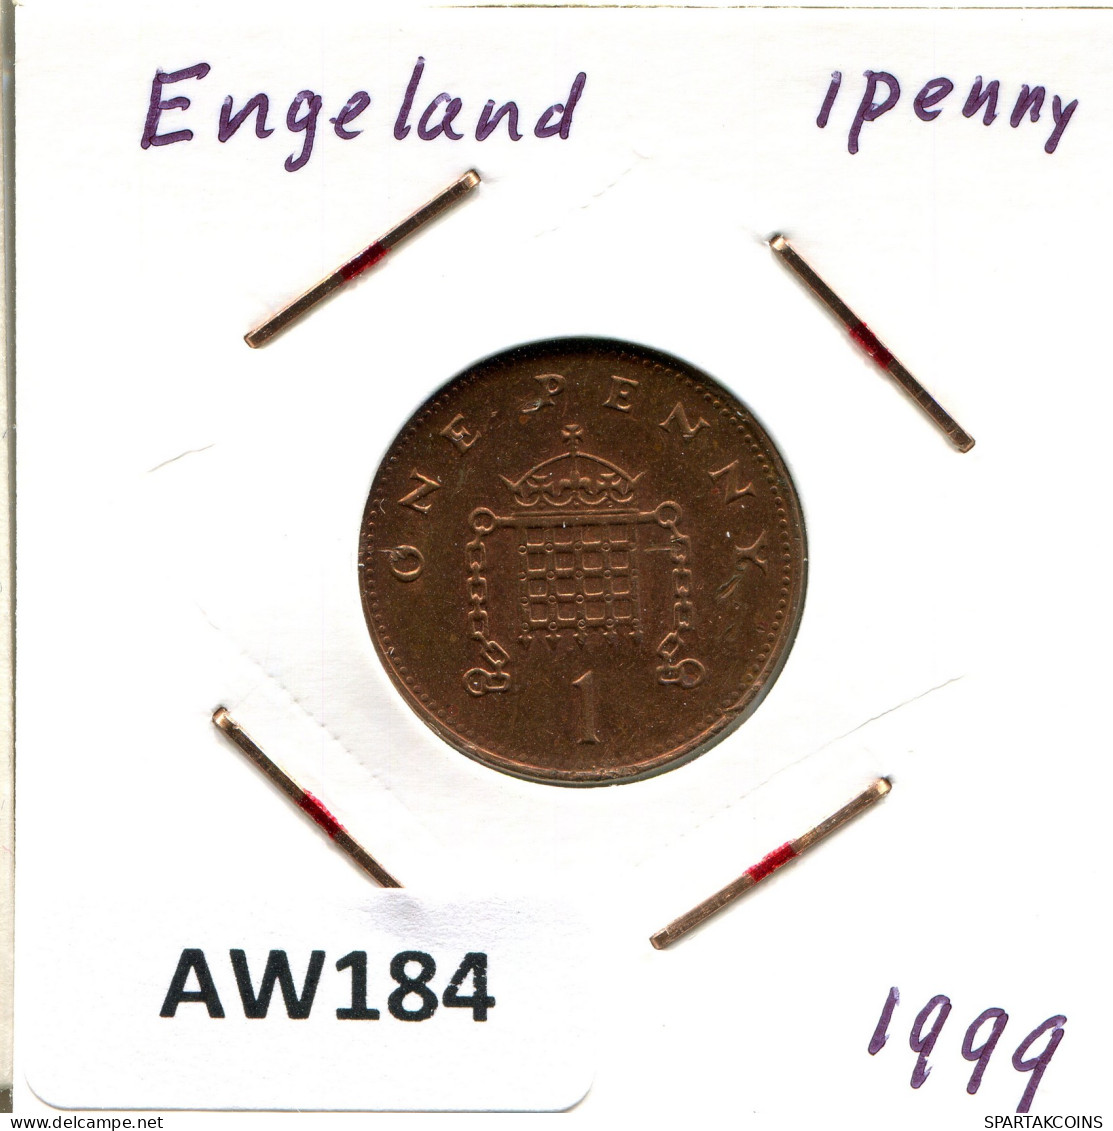 PENNY 1999 UK GREAT BRITAIN Coin #AW184.U - 1 Penny & 1 New Penny